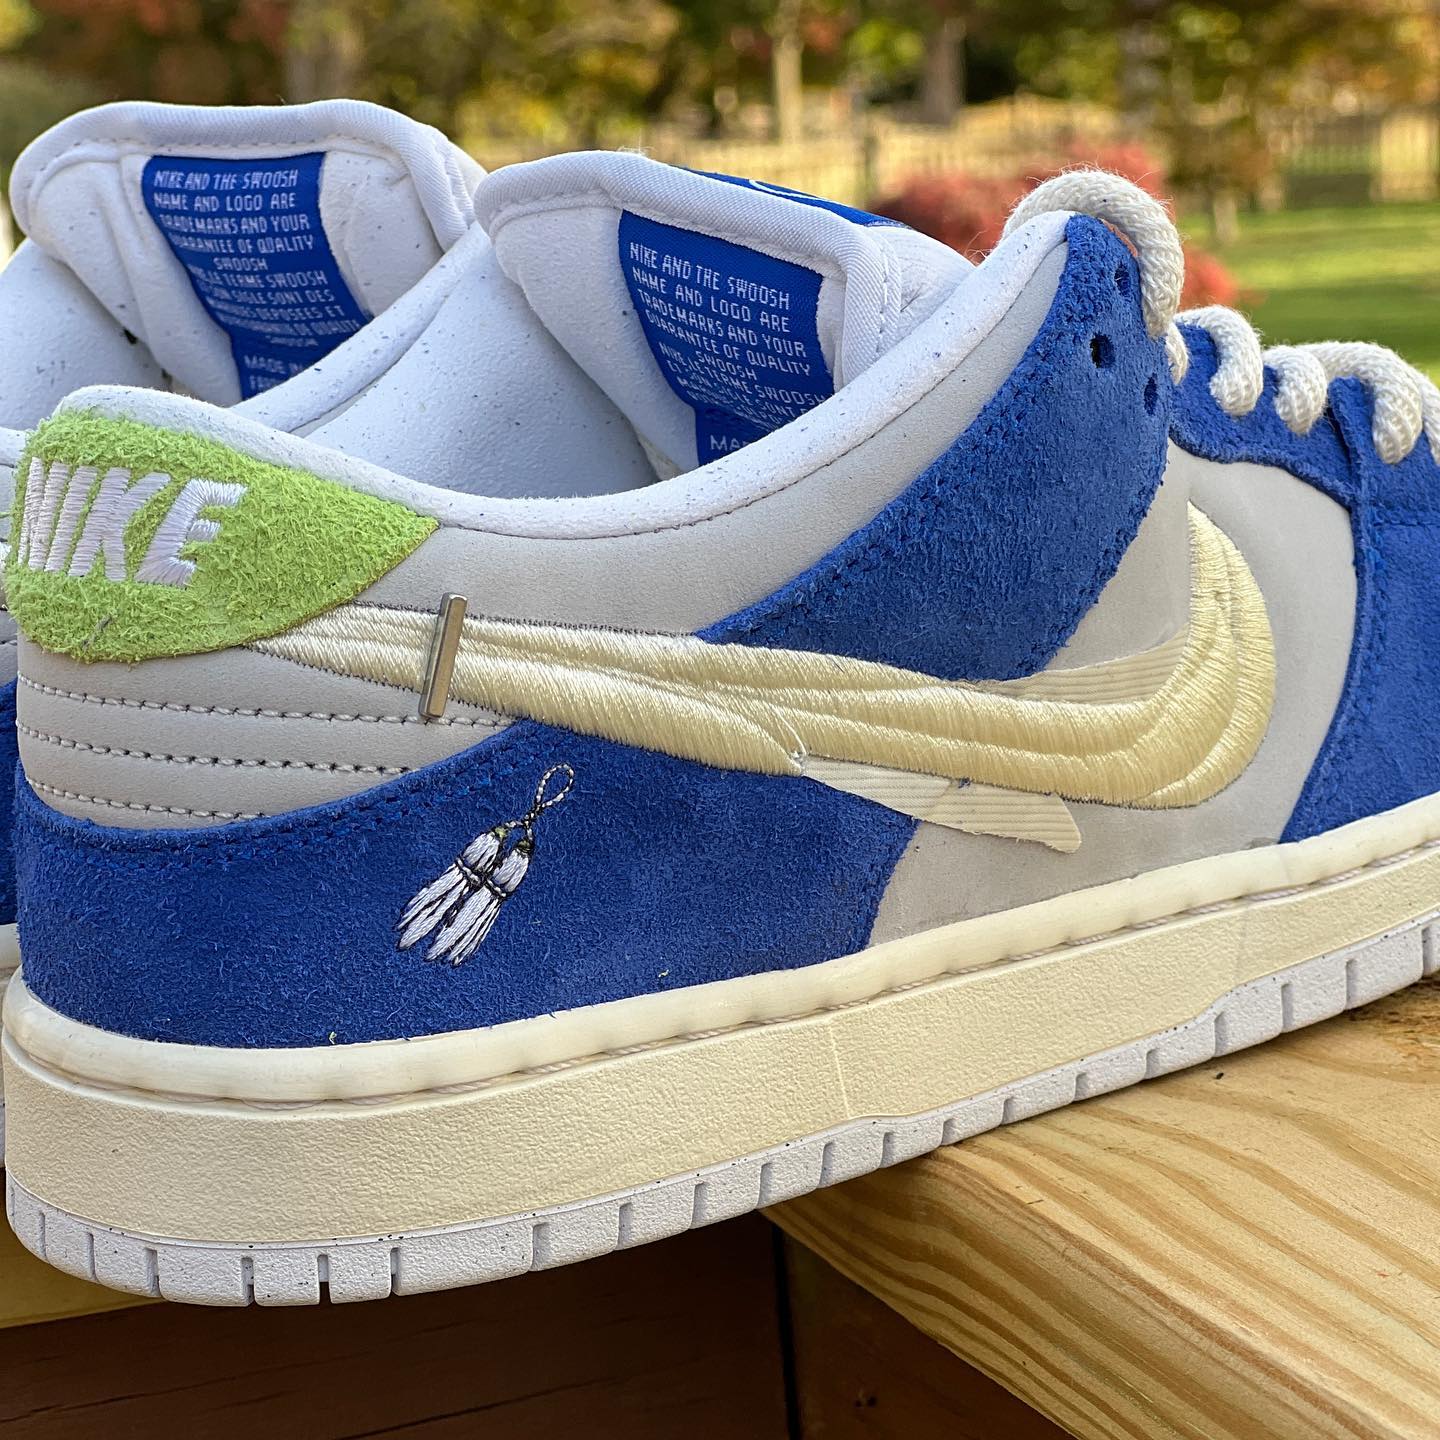 Fly Streetwear x Nike SB Dunk Low Collab Release Date & Images | Sole